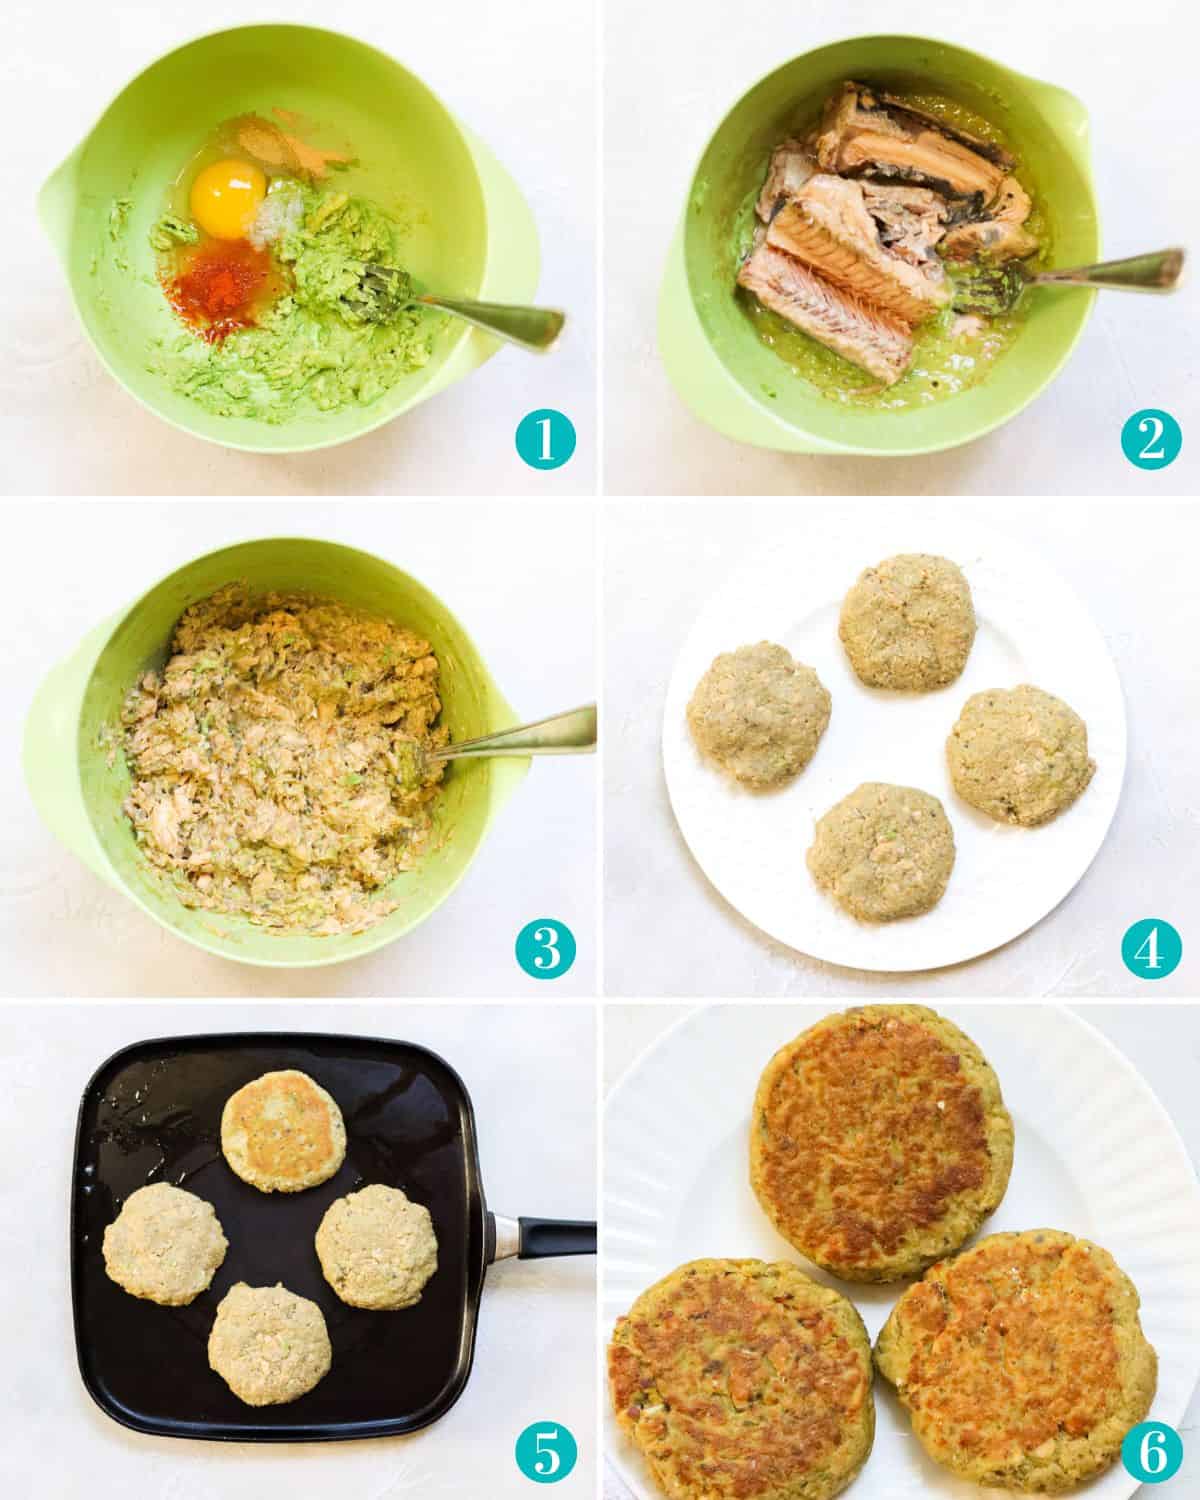 collage of 6 photos with: green bowl with mashed avocado; mashed avocado, egg, spices; mashed avocado with canned salmon; four salmon burgers on white plate; black skillet cooking salmon burgers; three cooked salmon burgers on white plate.